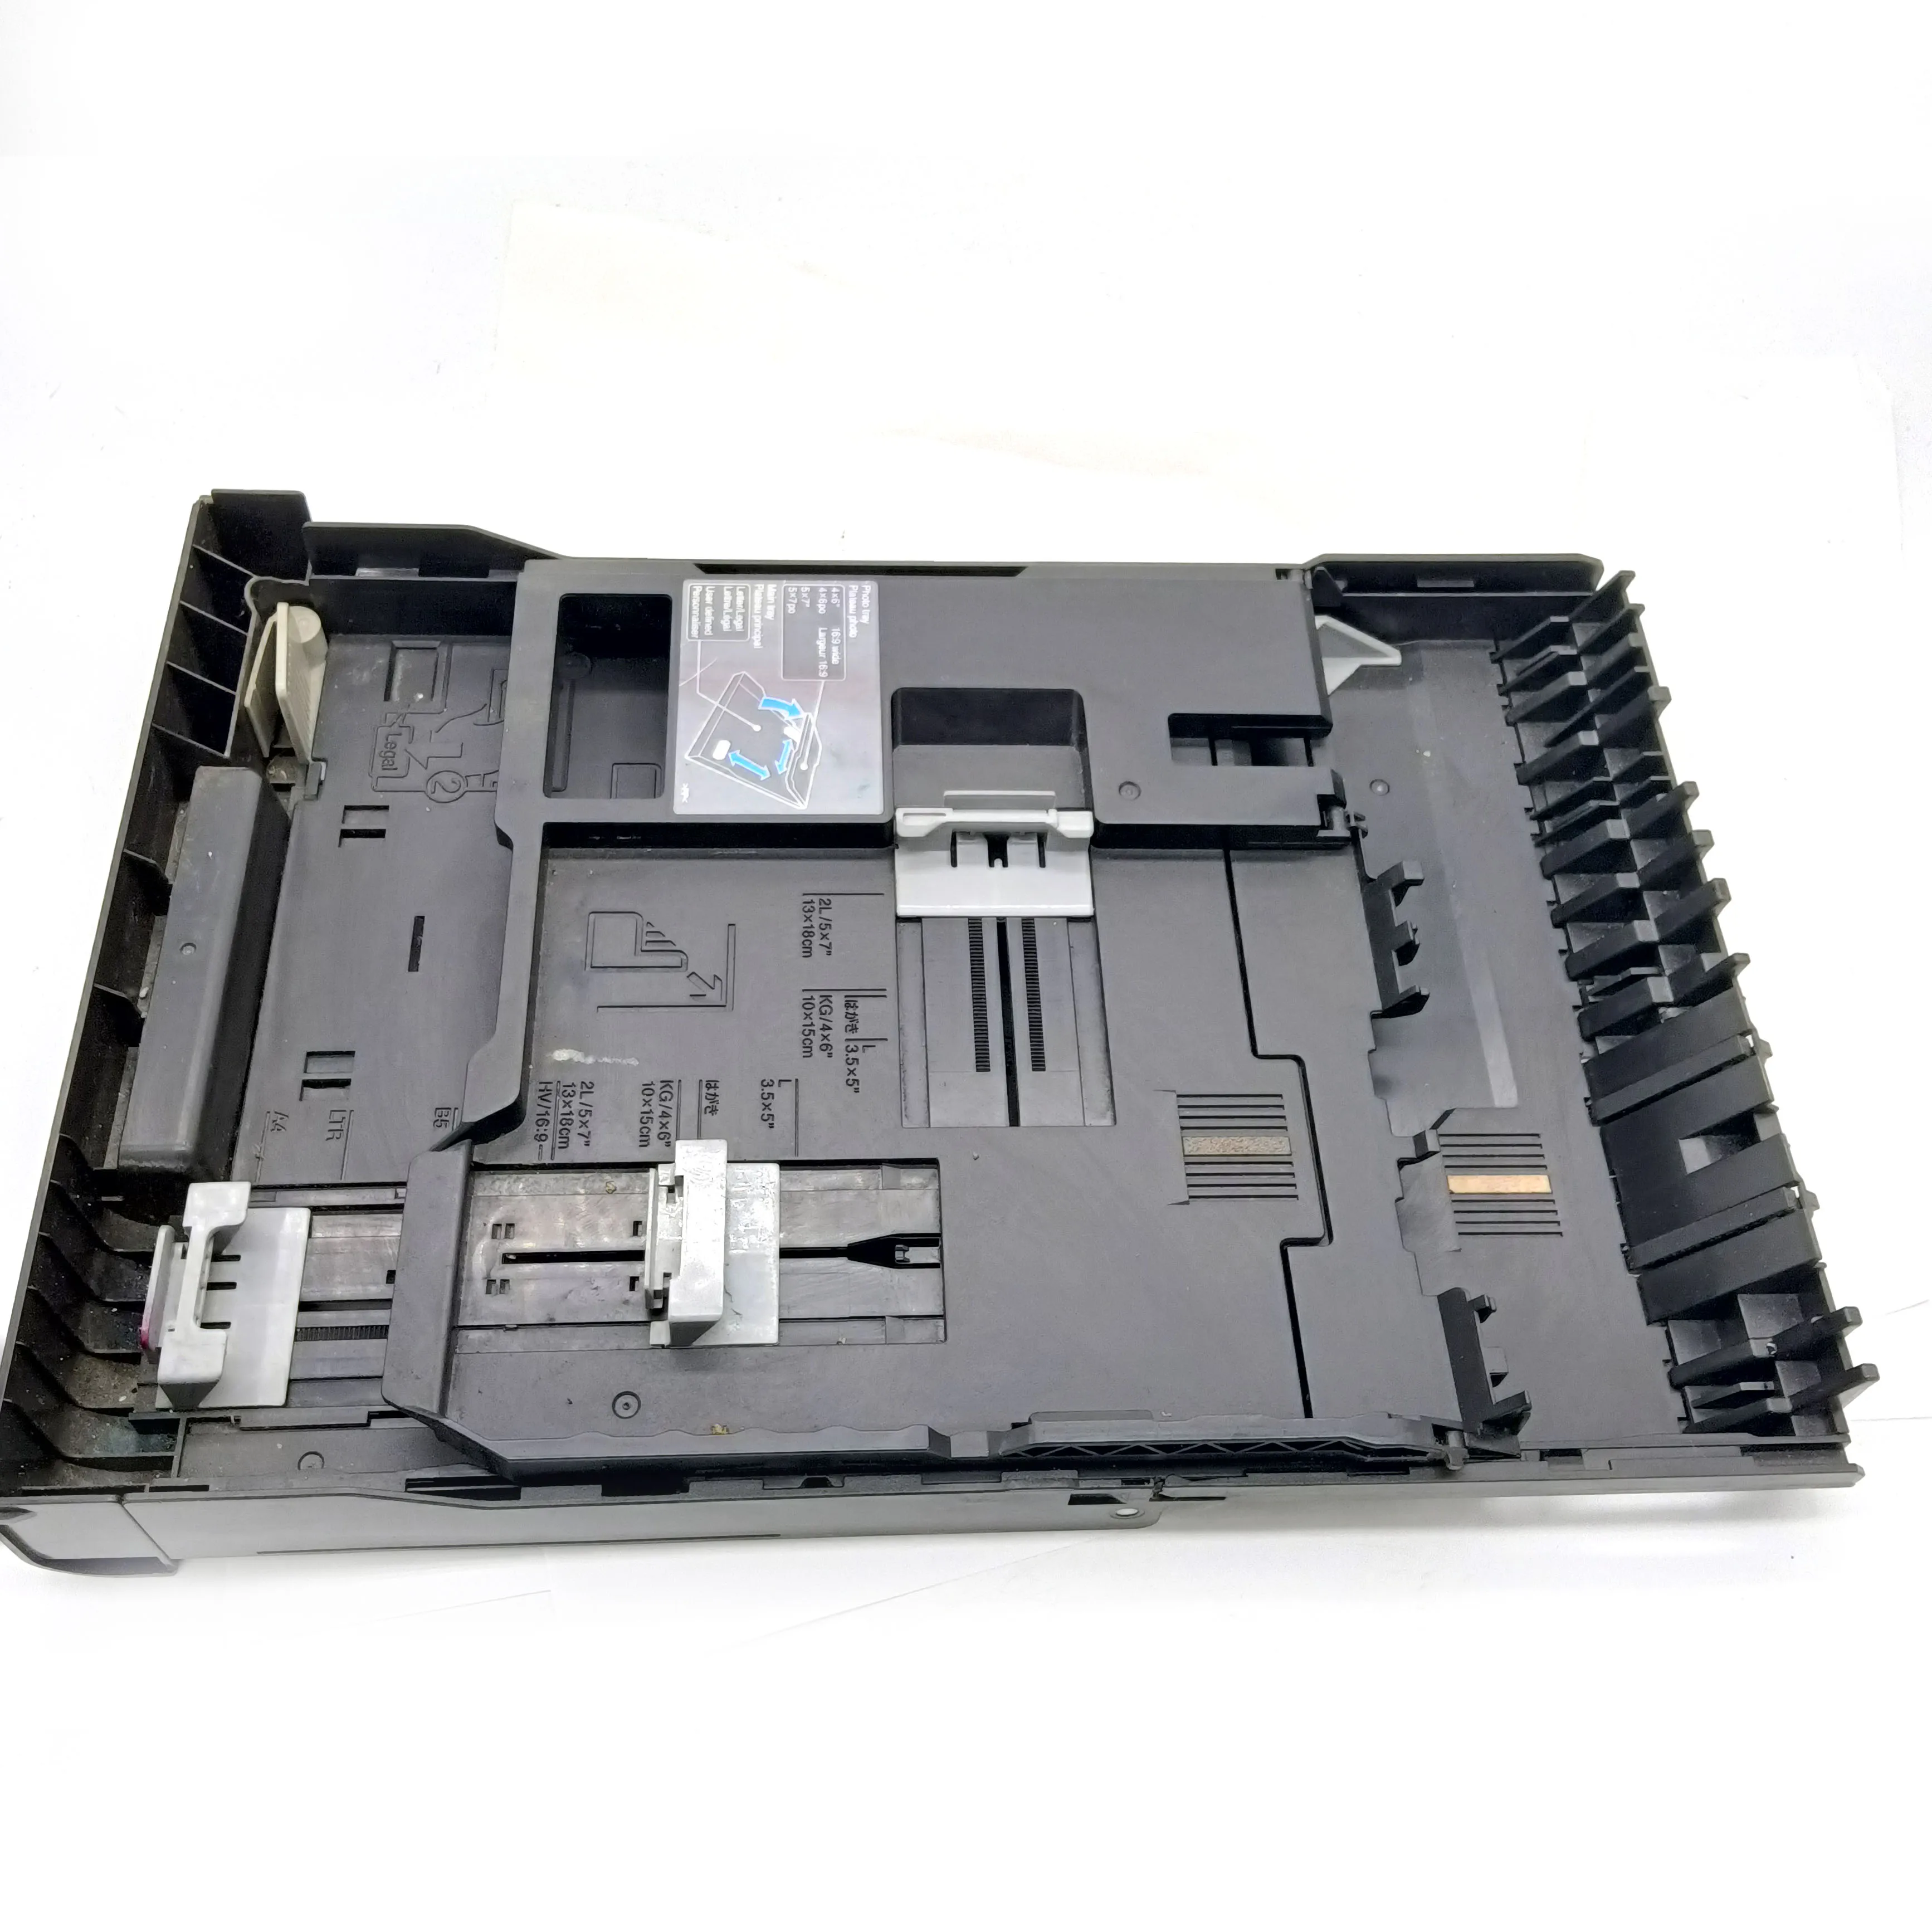 

Paper Input Tray A810 Fits For Epson A830 A710 A725 A730 A800 A700